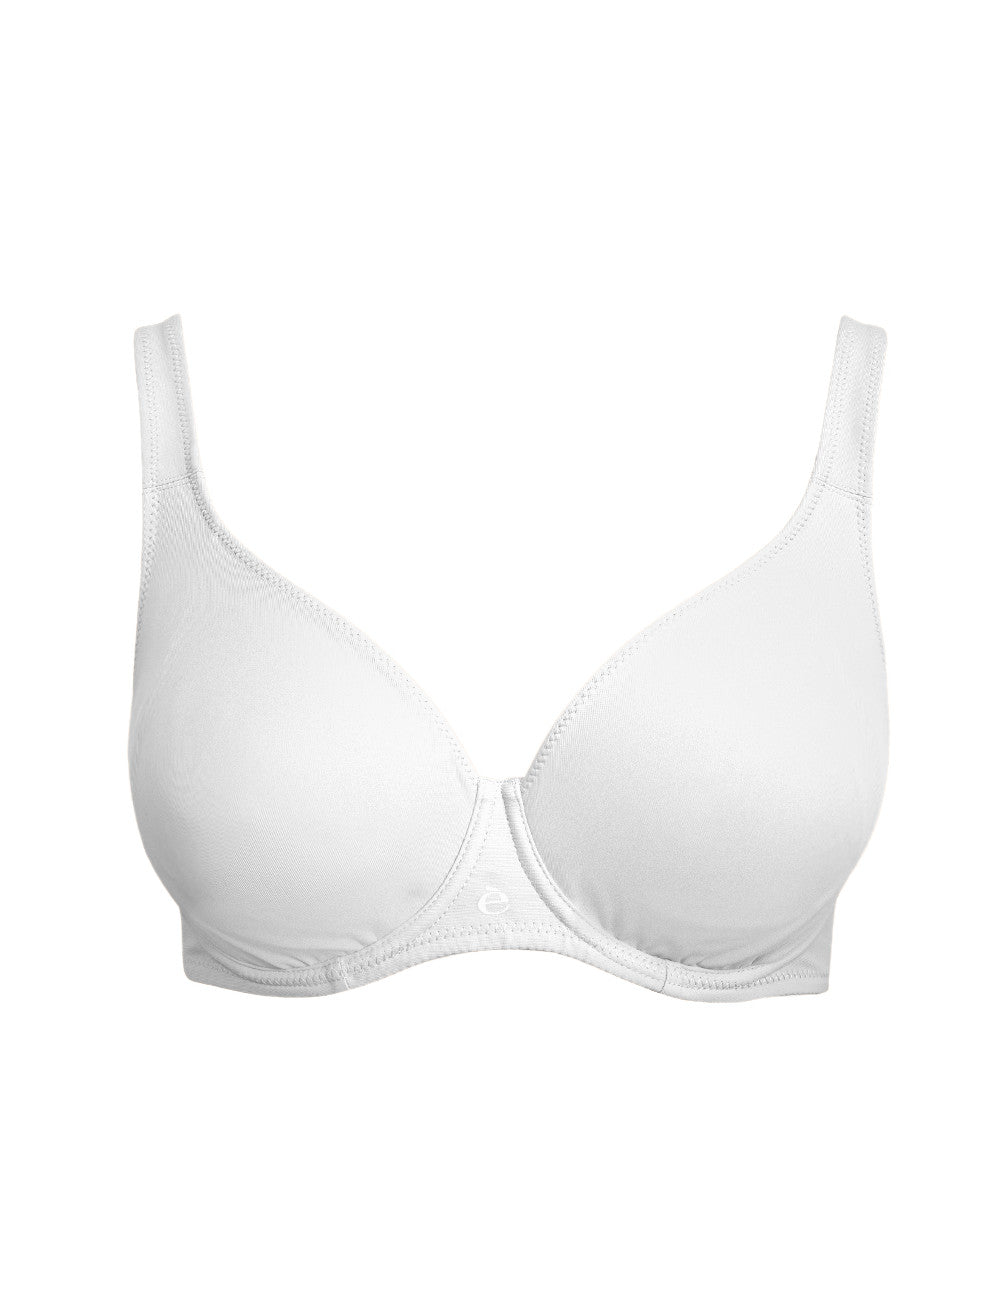 Agreement between Disclosed and Estimated Brassiere Cup Size (N = 320)